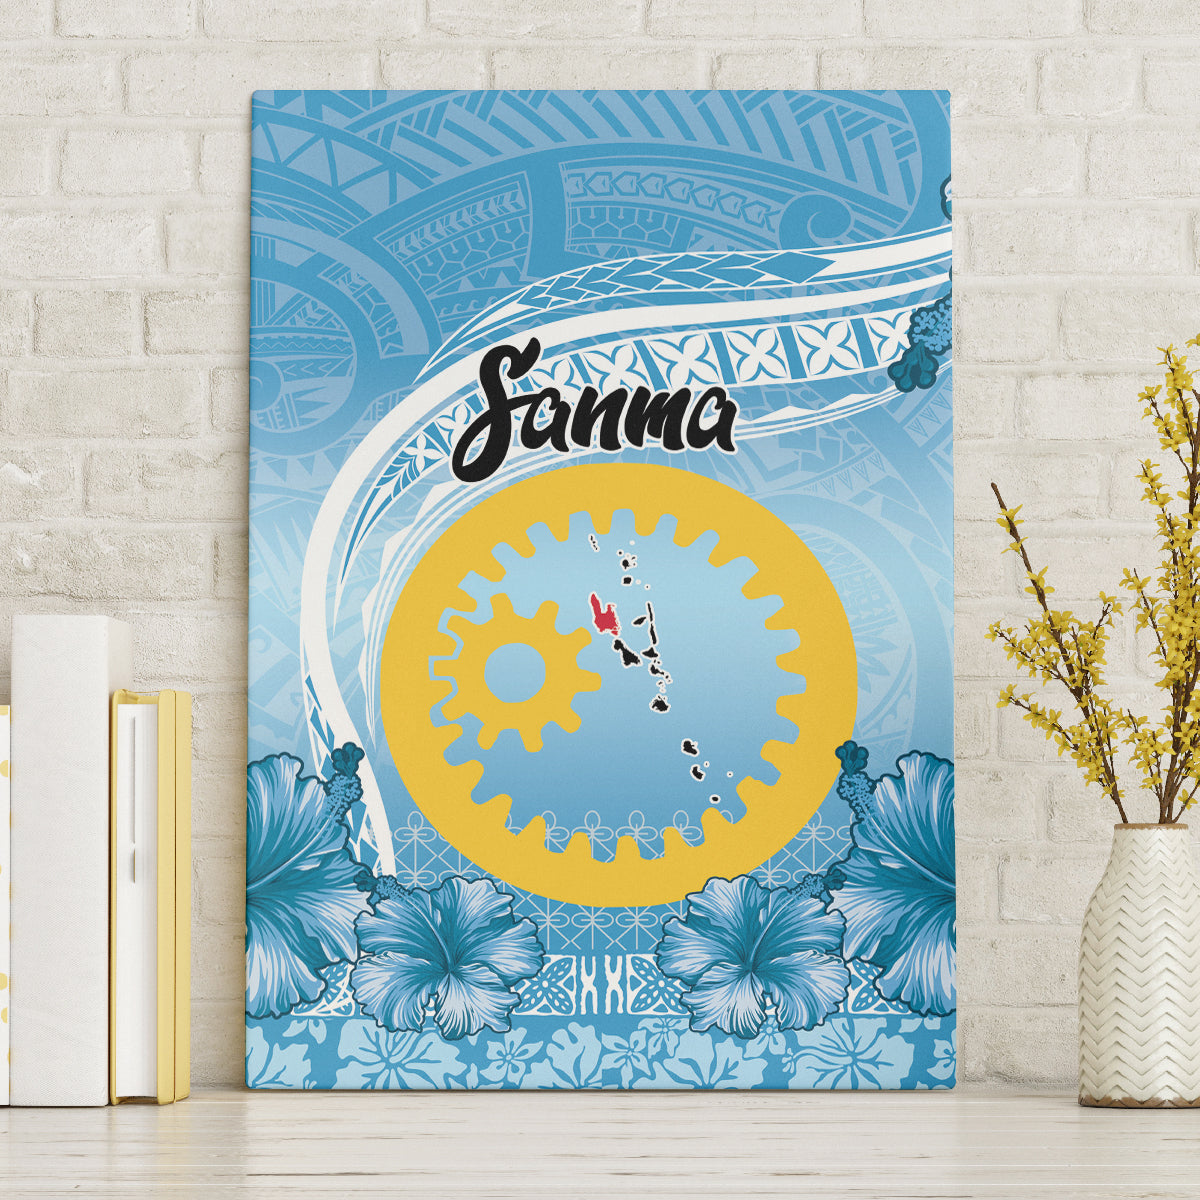 Sanma Vanuatu Canvas Wall Art Hibiscus Sand Drawing with Pacific Pattern